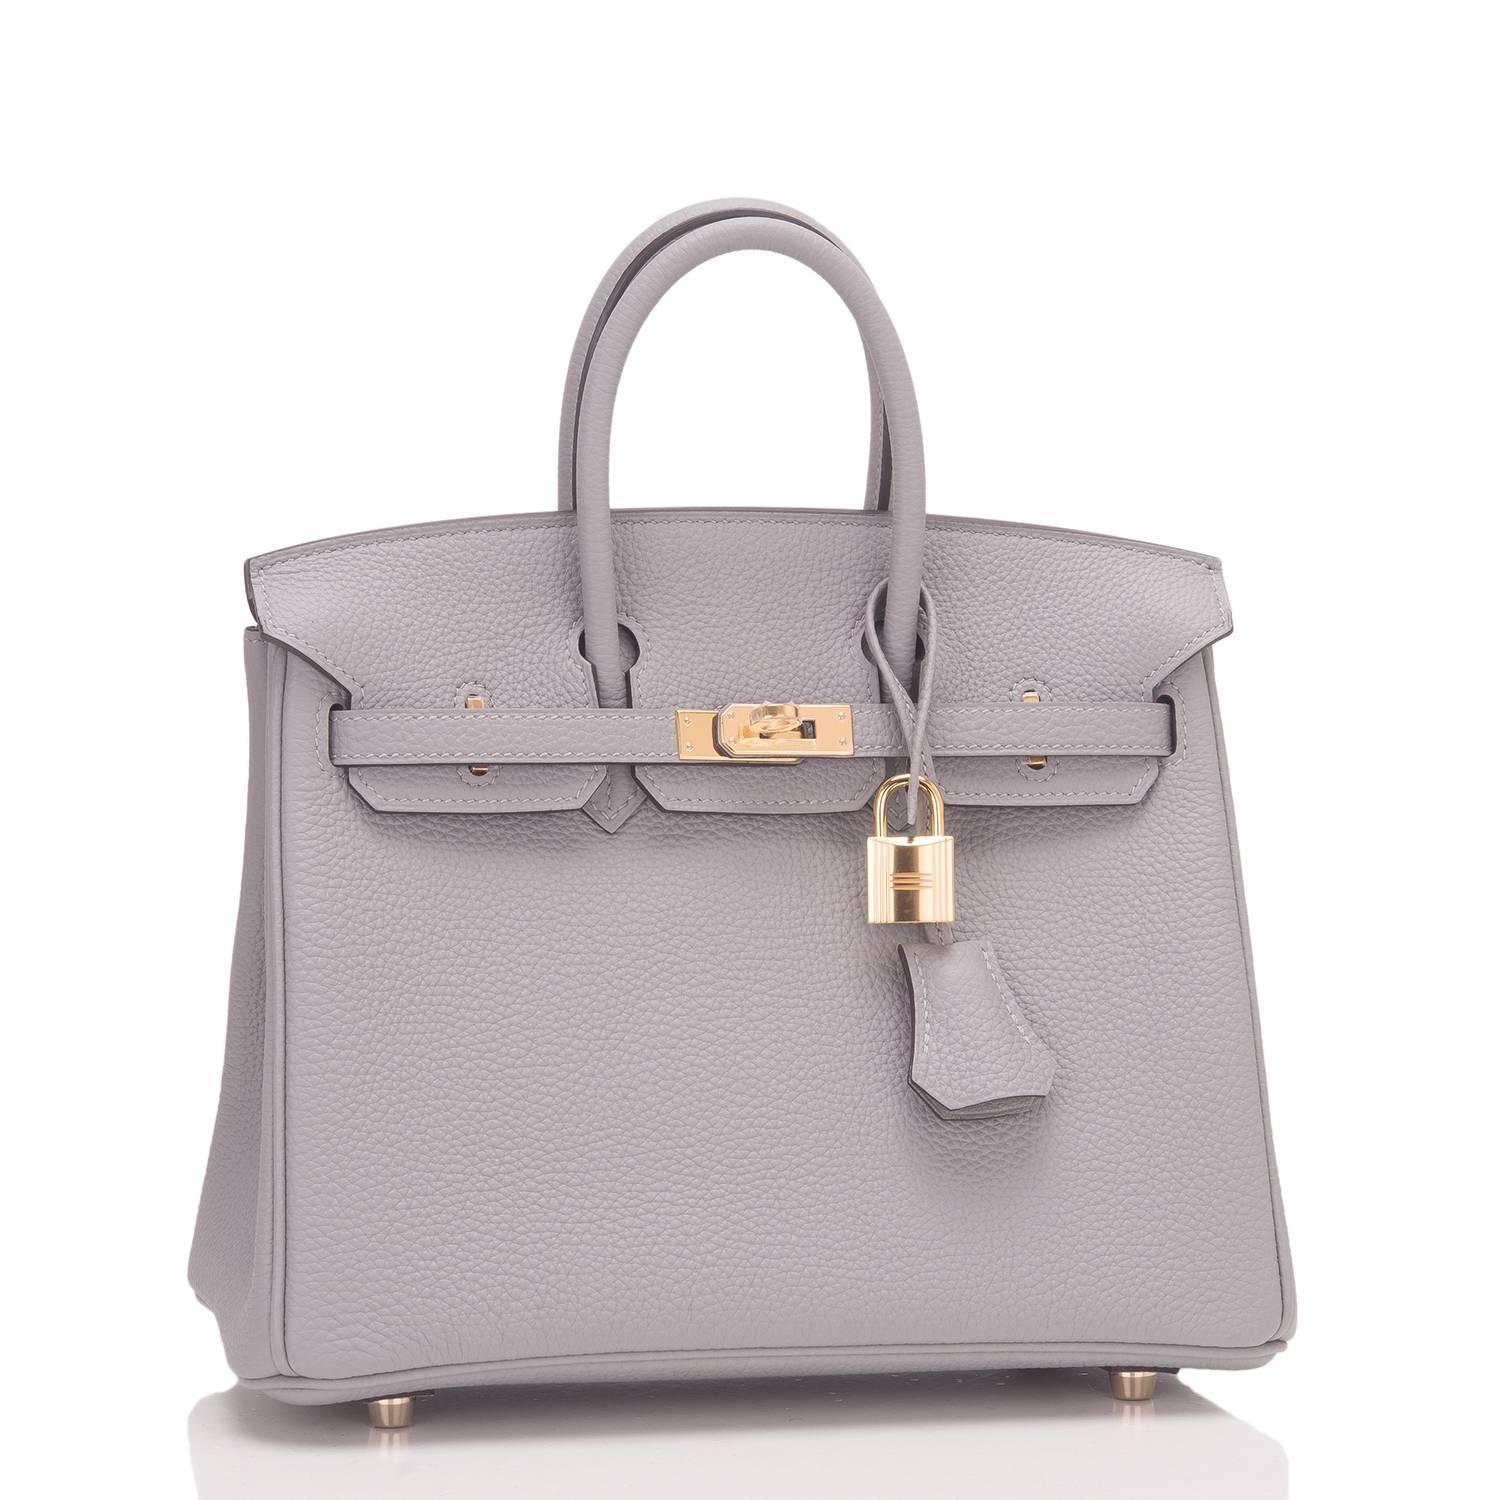 Hermes Gris Mouette Birkin 25cm of togo leather with gold hardware.

This Birkin has tonal stitching, a front toggle closure, a clochette with lock and two keys, and double rolled handles.

The interior is lined with gris mouette chevre and has a